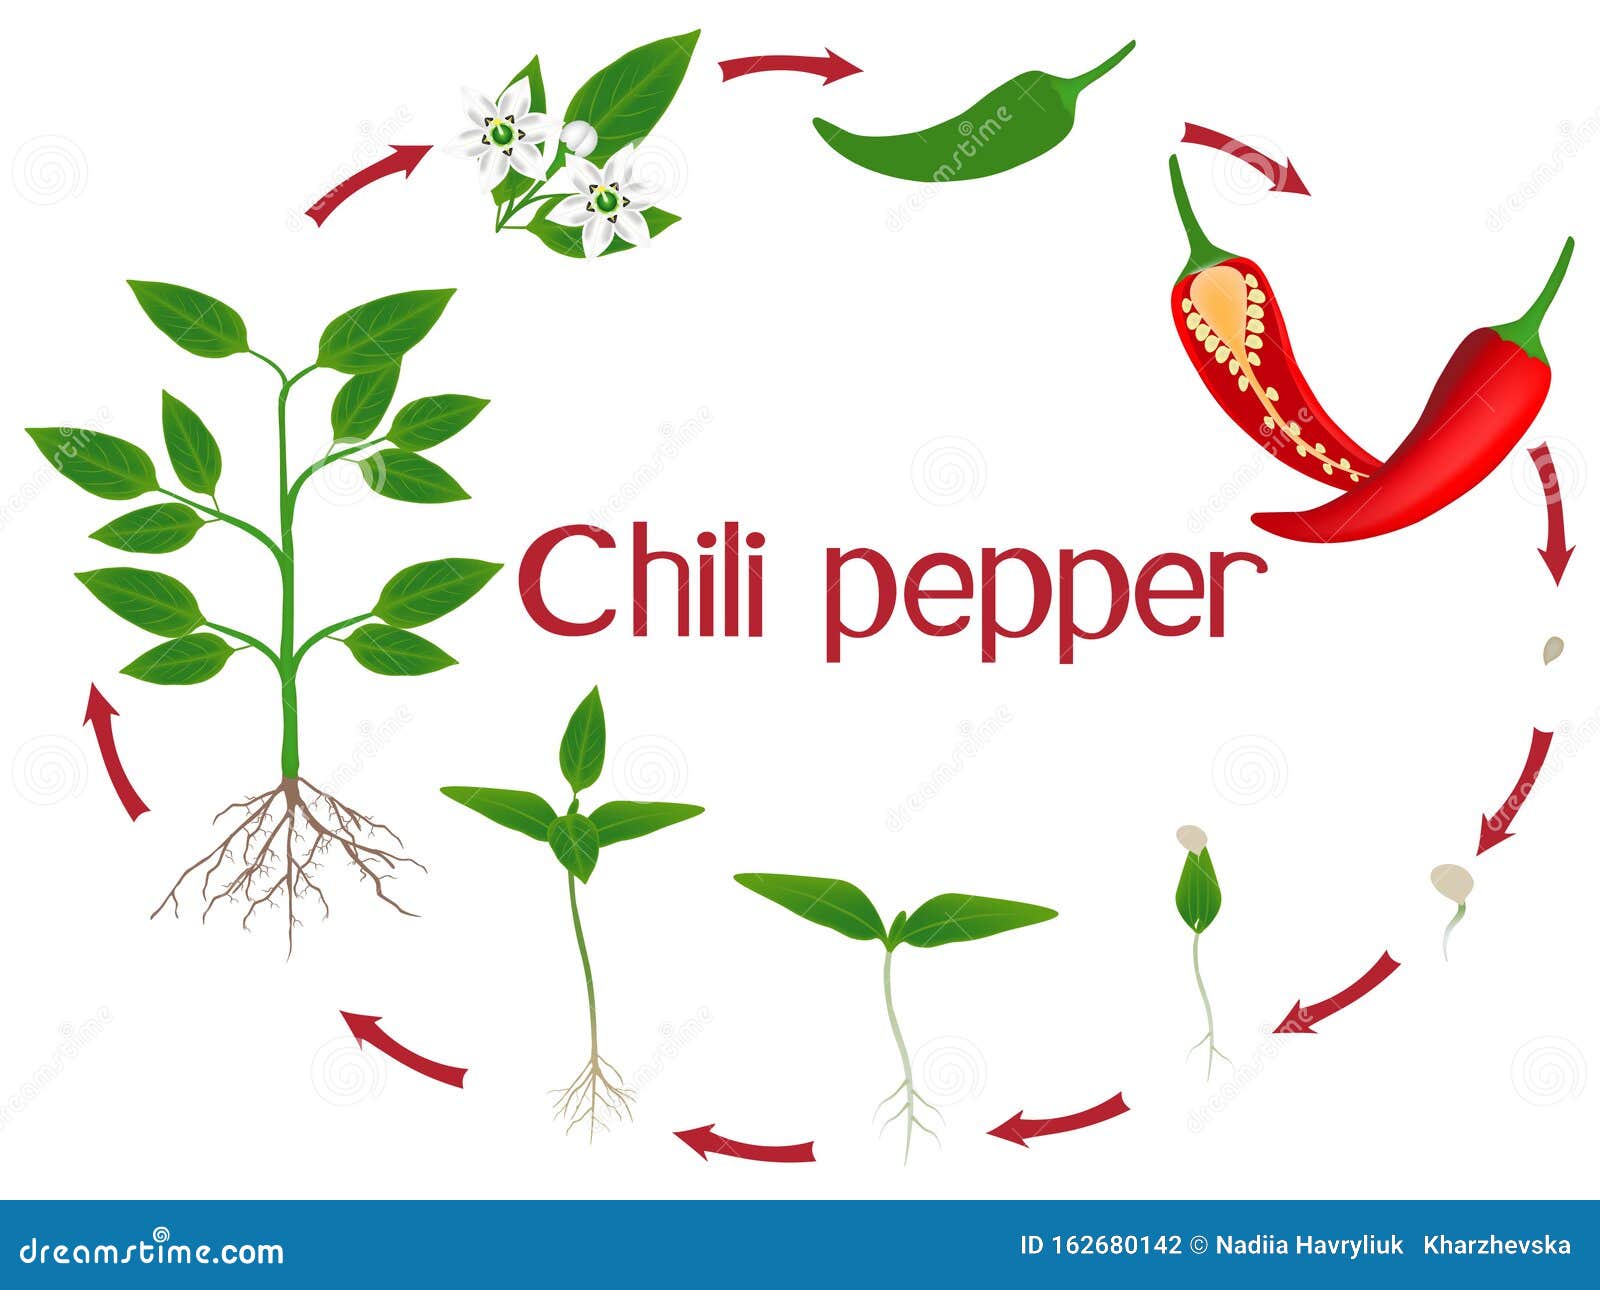 When To Pick Bell Peppers For Peak Ripeness - Grow Hot Peppers